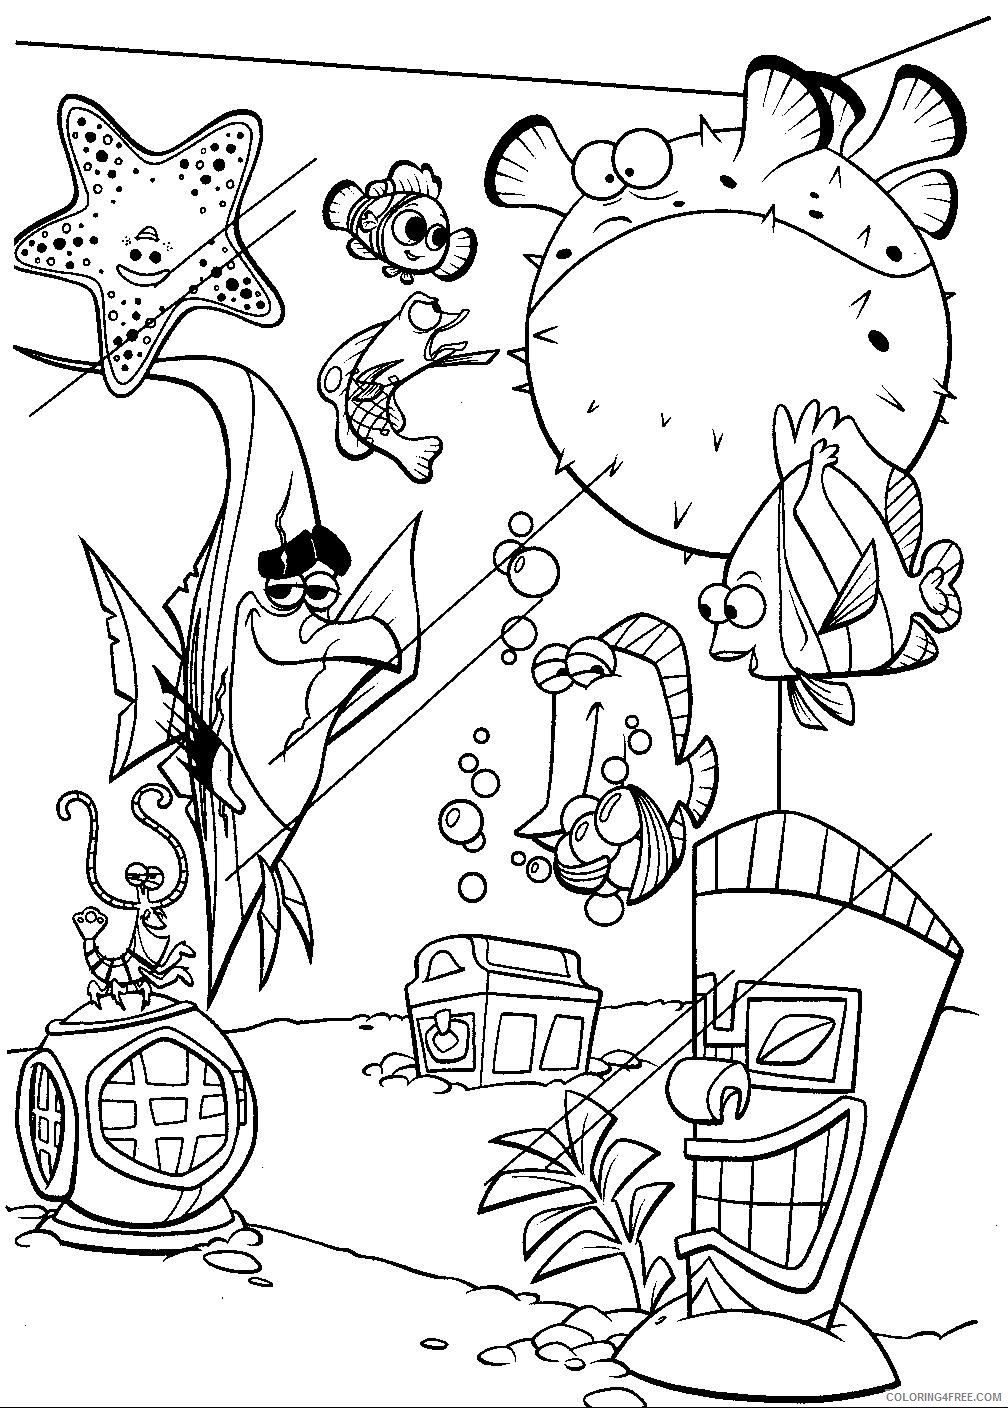 Coloring pages finding nemo coloring sheets disney pages free